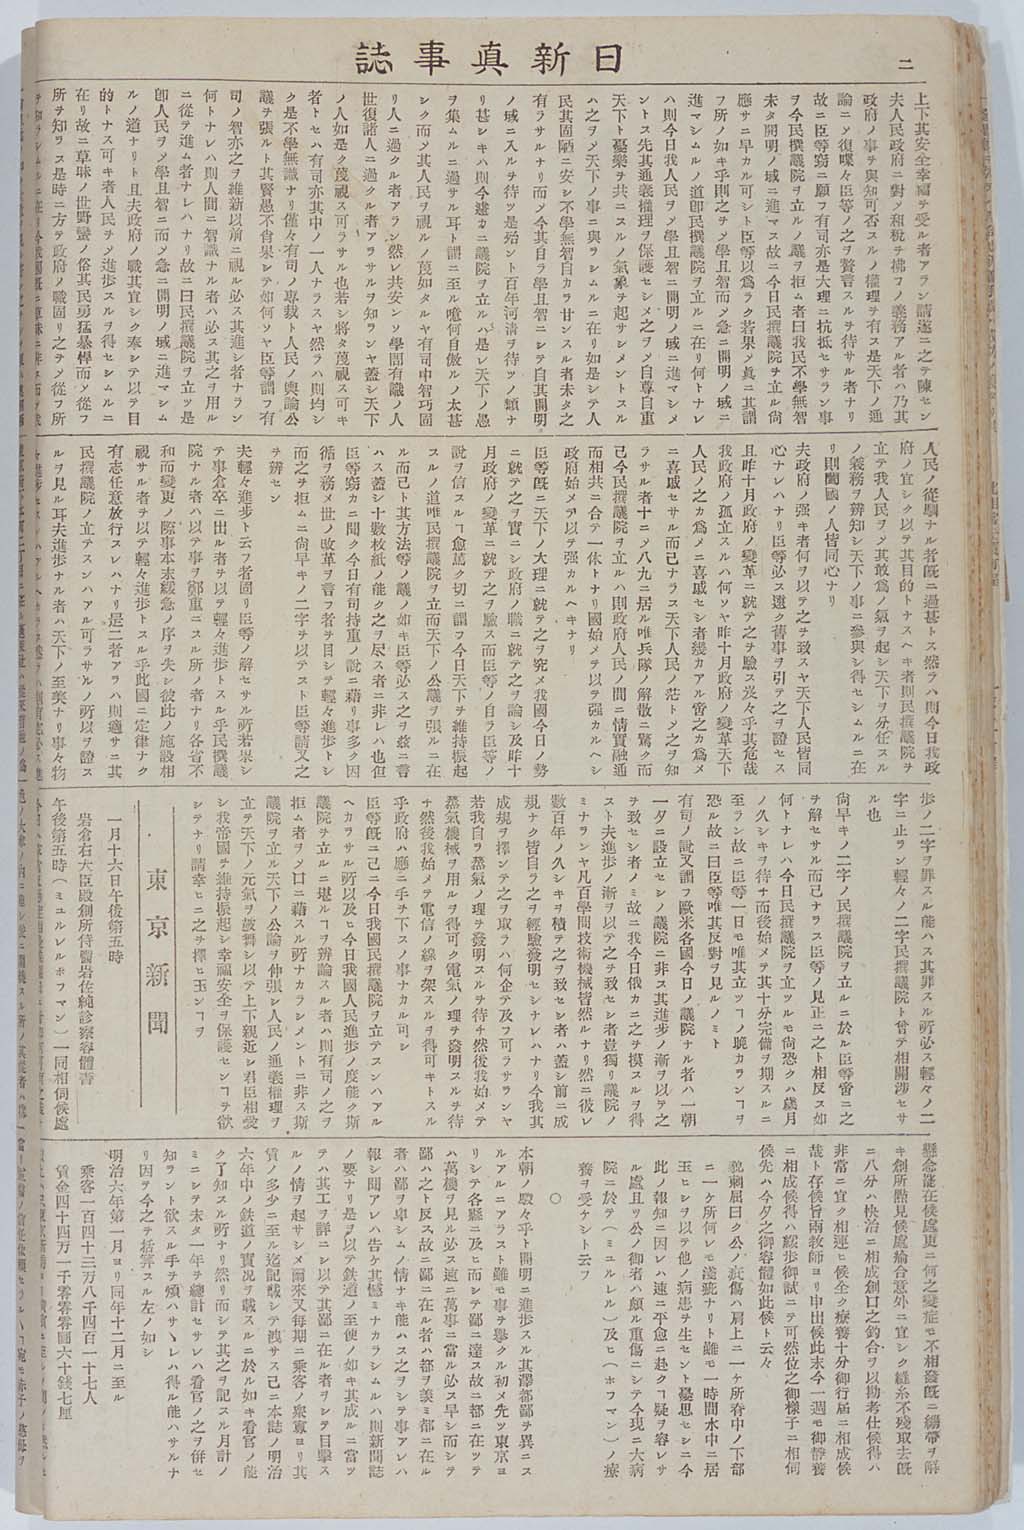 "Nisshin Shinjishi" no.206 (1874.1.18) in which was printed "The Petition calling for the Establishment of a Popularly-elected Assembly"(larger)